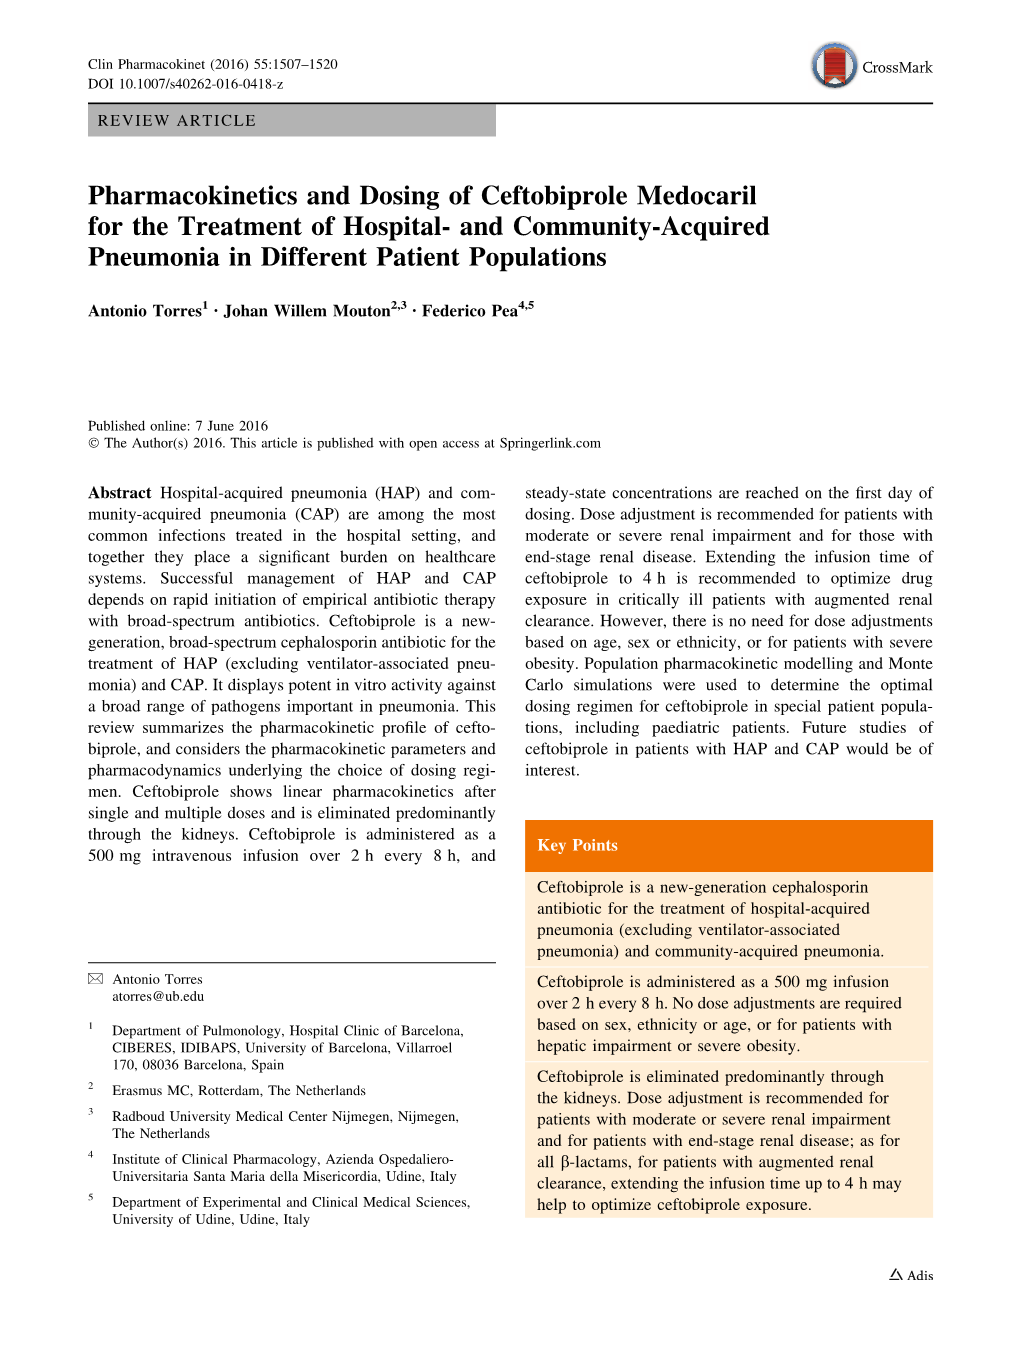 Pharmacokinetics and Dosing of Ceftobiprole Medocaril for the Treatment of Hospital- and Community-Acquired Pneumonia in Different Patient Populations